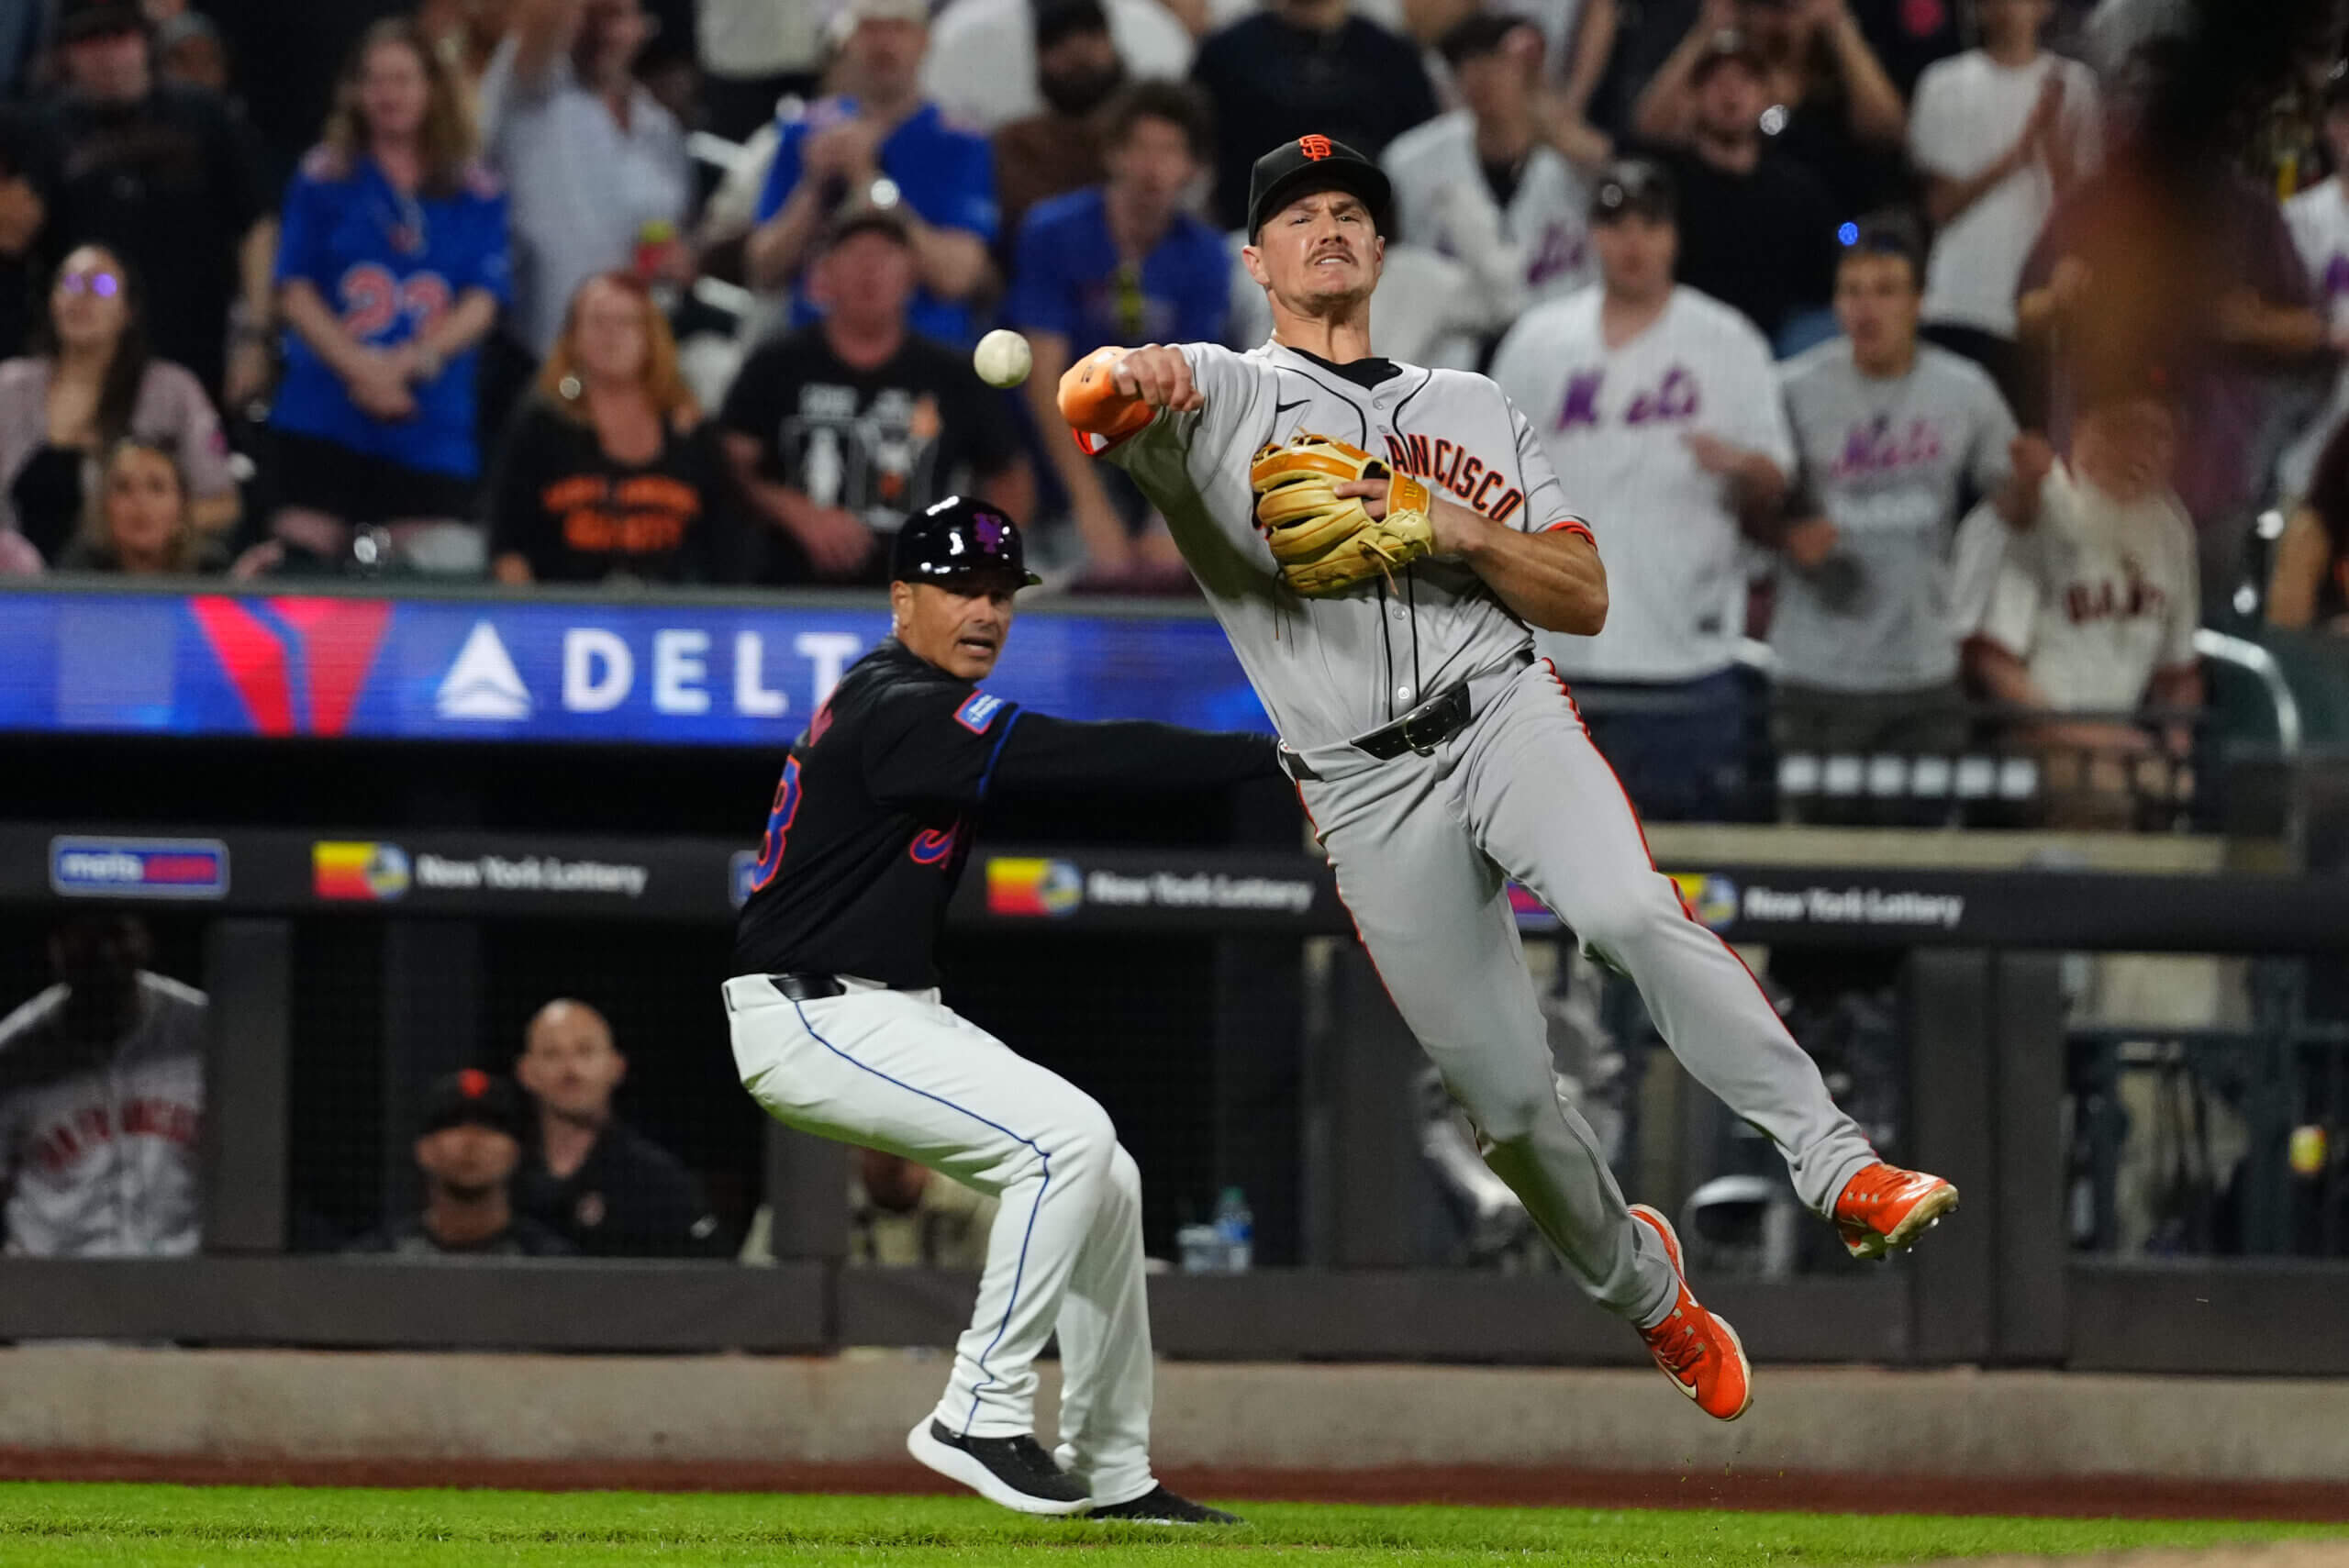 The Giants came back again, and they're doing historically silly things